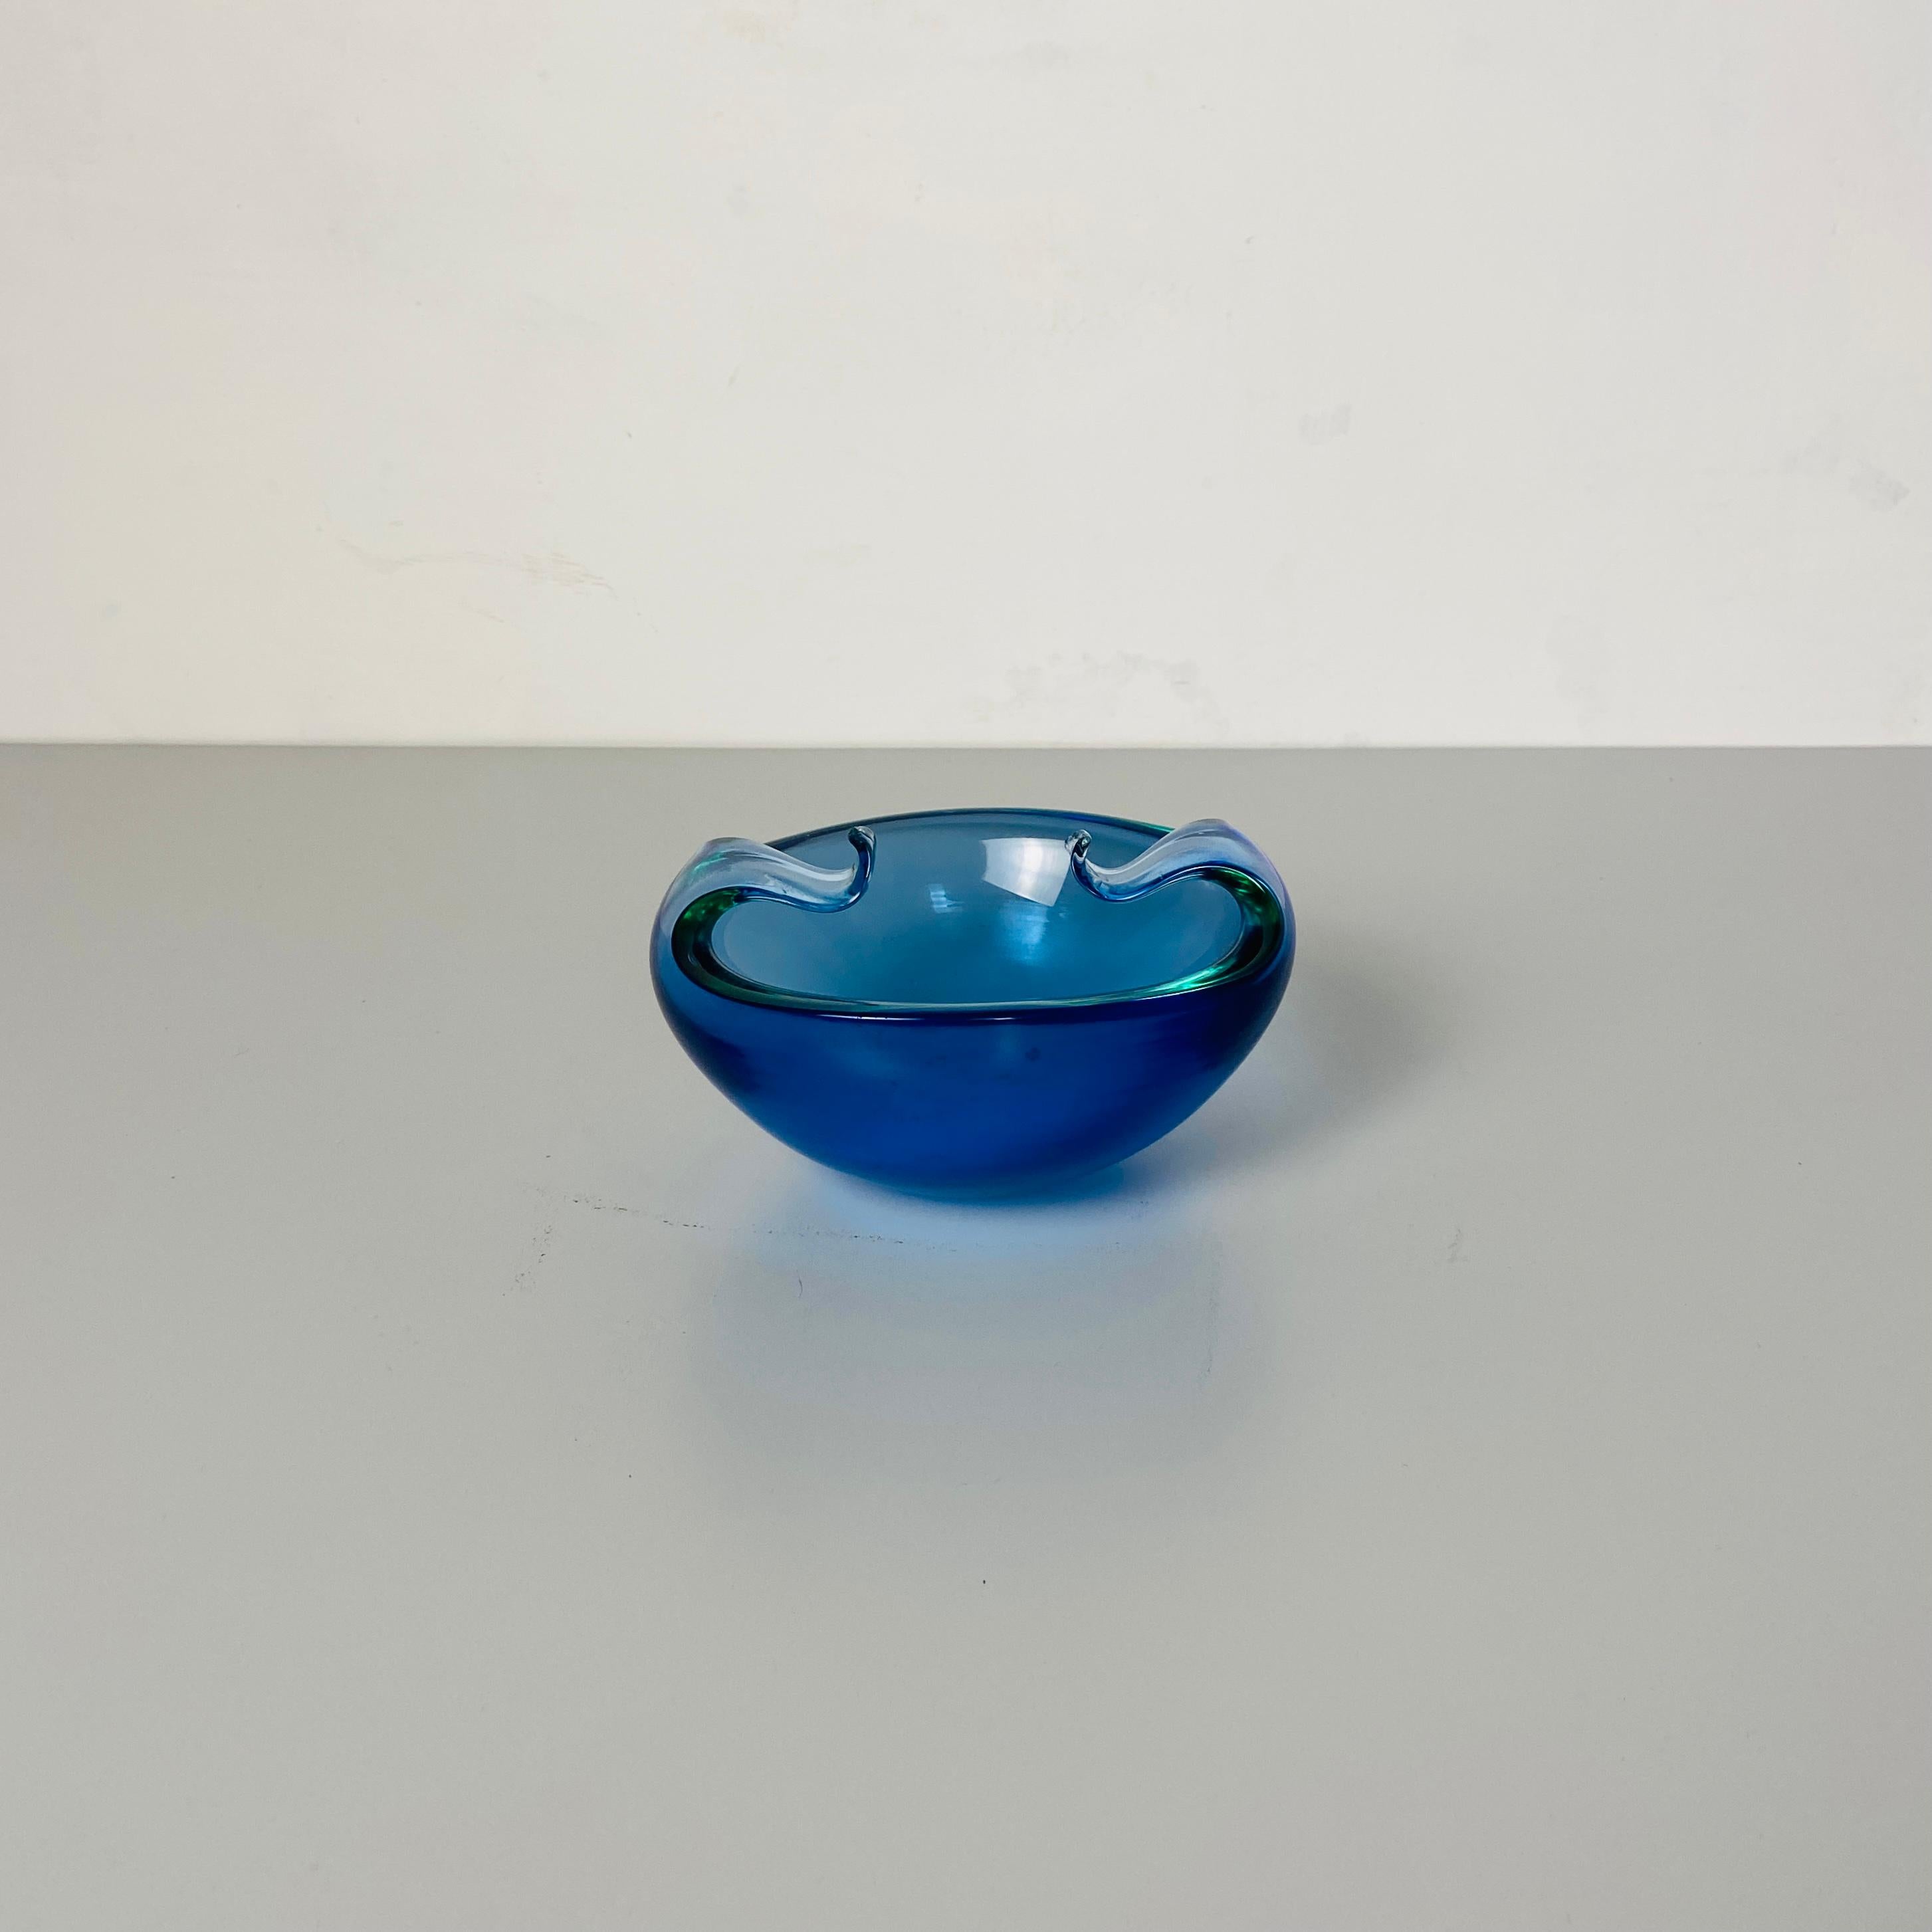 Late 20th Century Italian Mid-Century Modern Murano Glass Object Holder with Curled Arms, 1970s For Sale